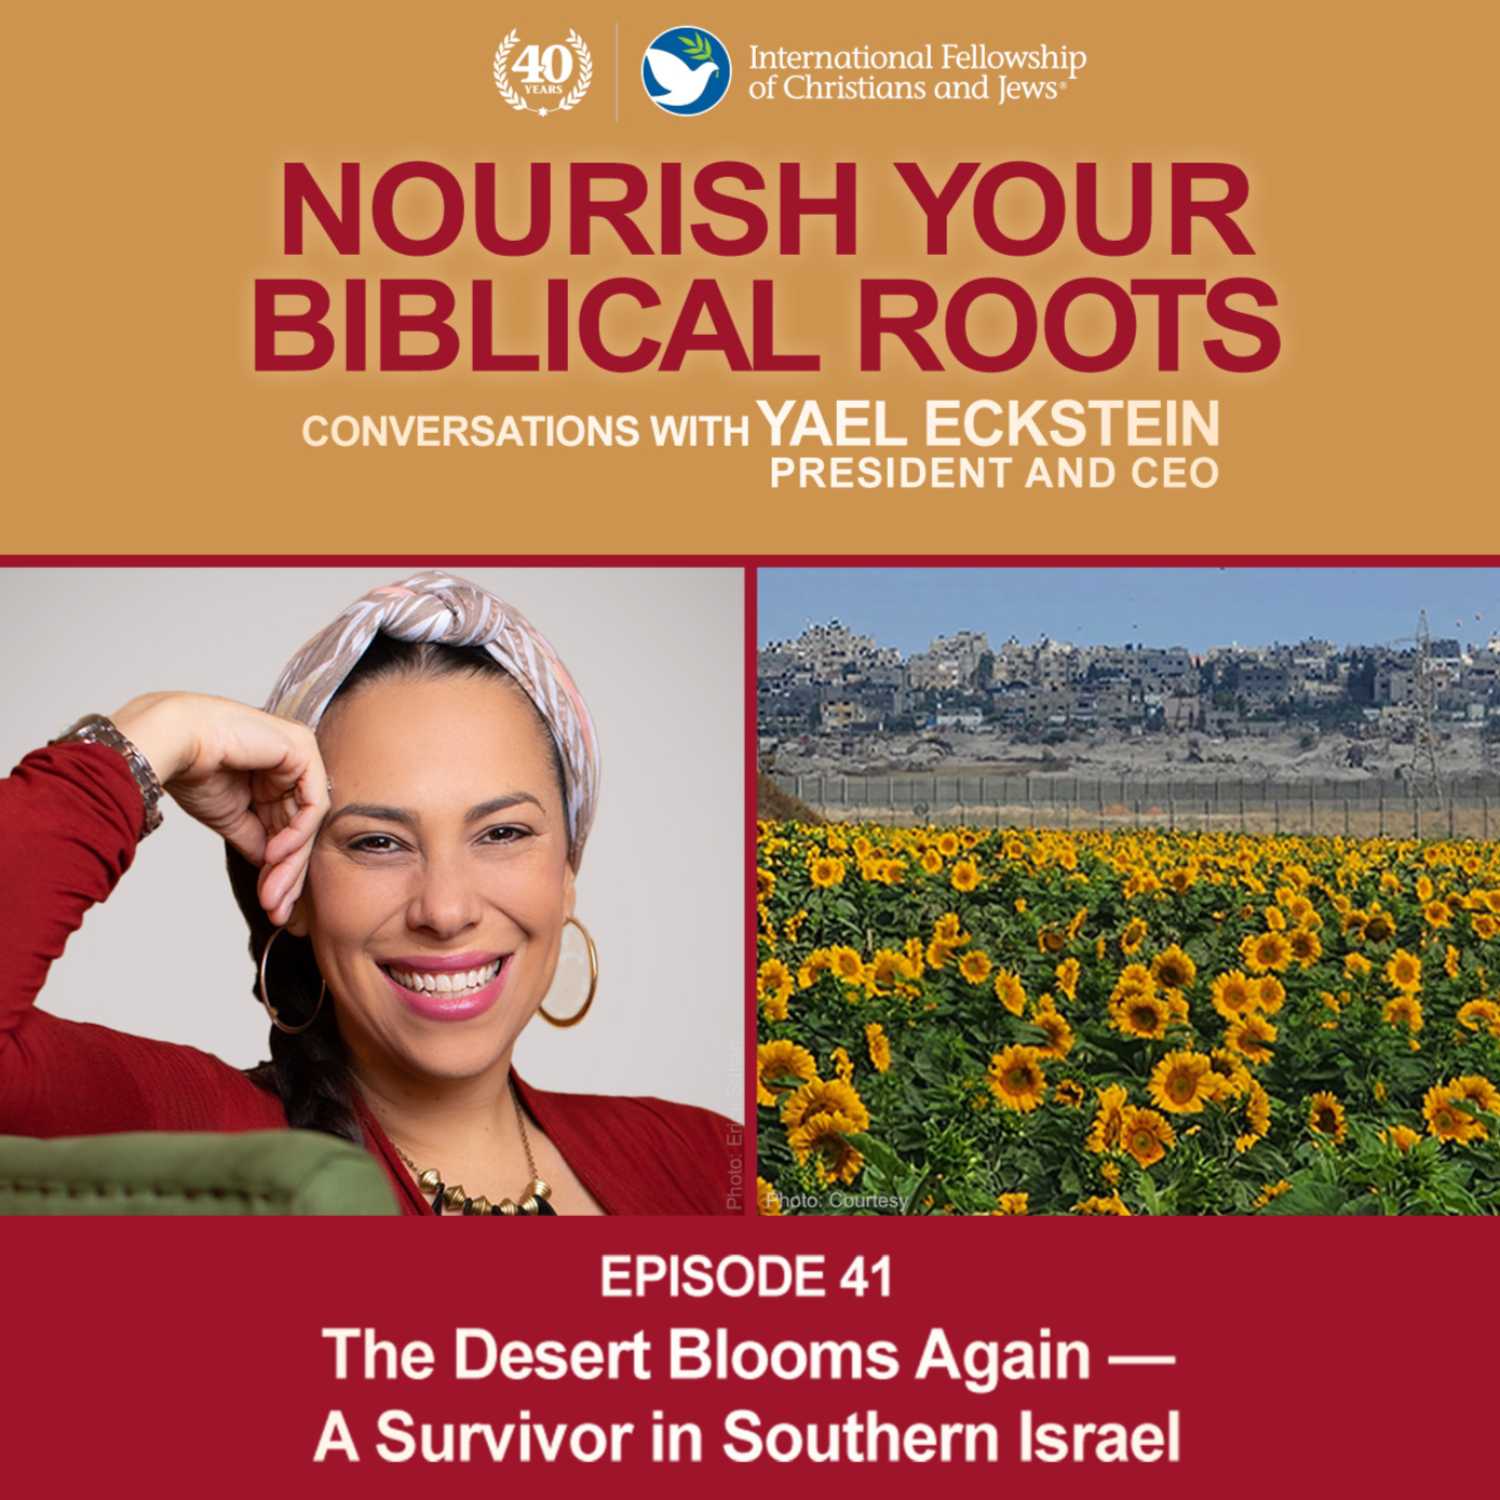 The Desert Blooms Again — A Survivor in Southern Israel